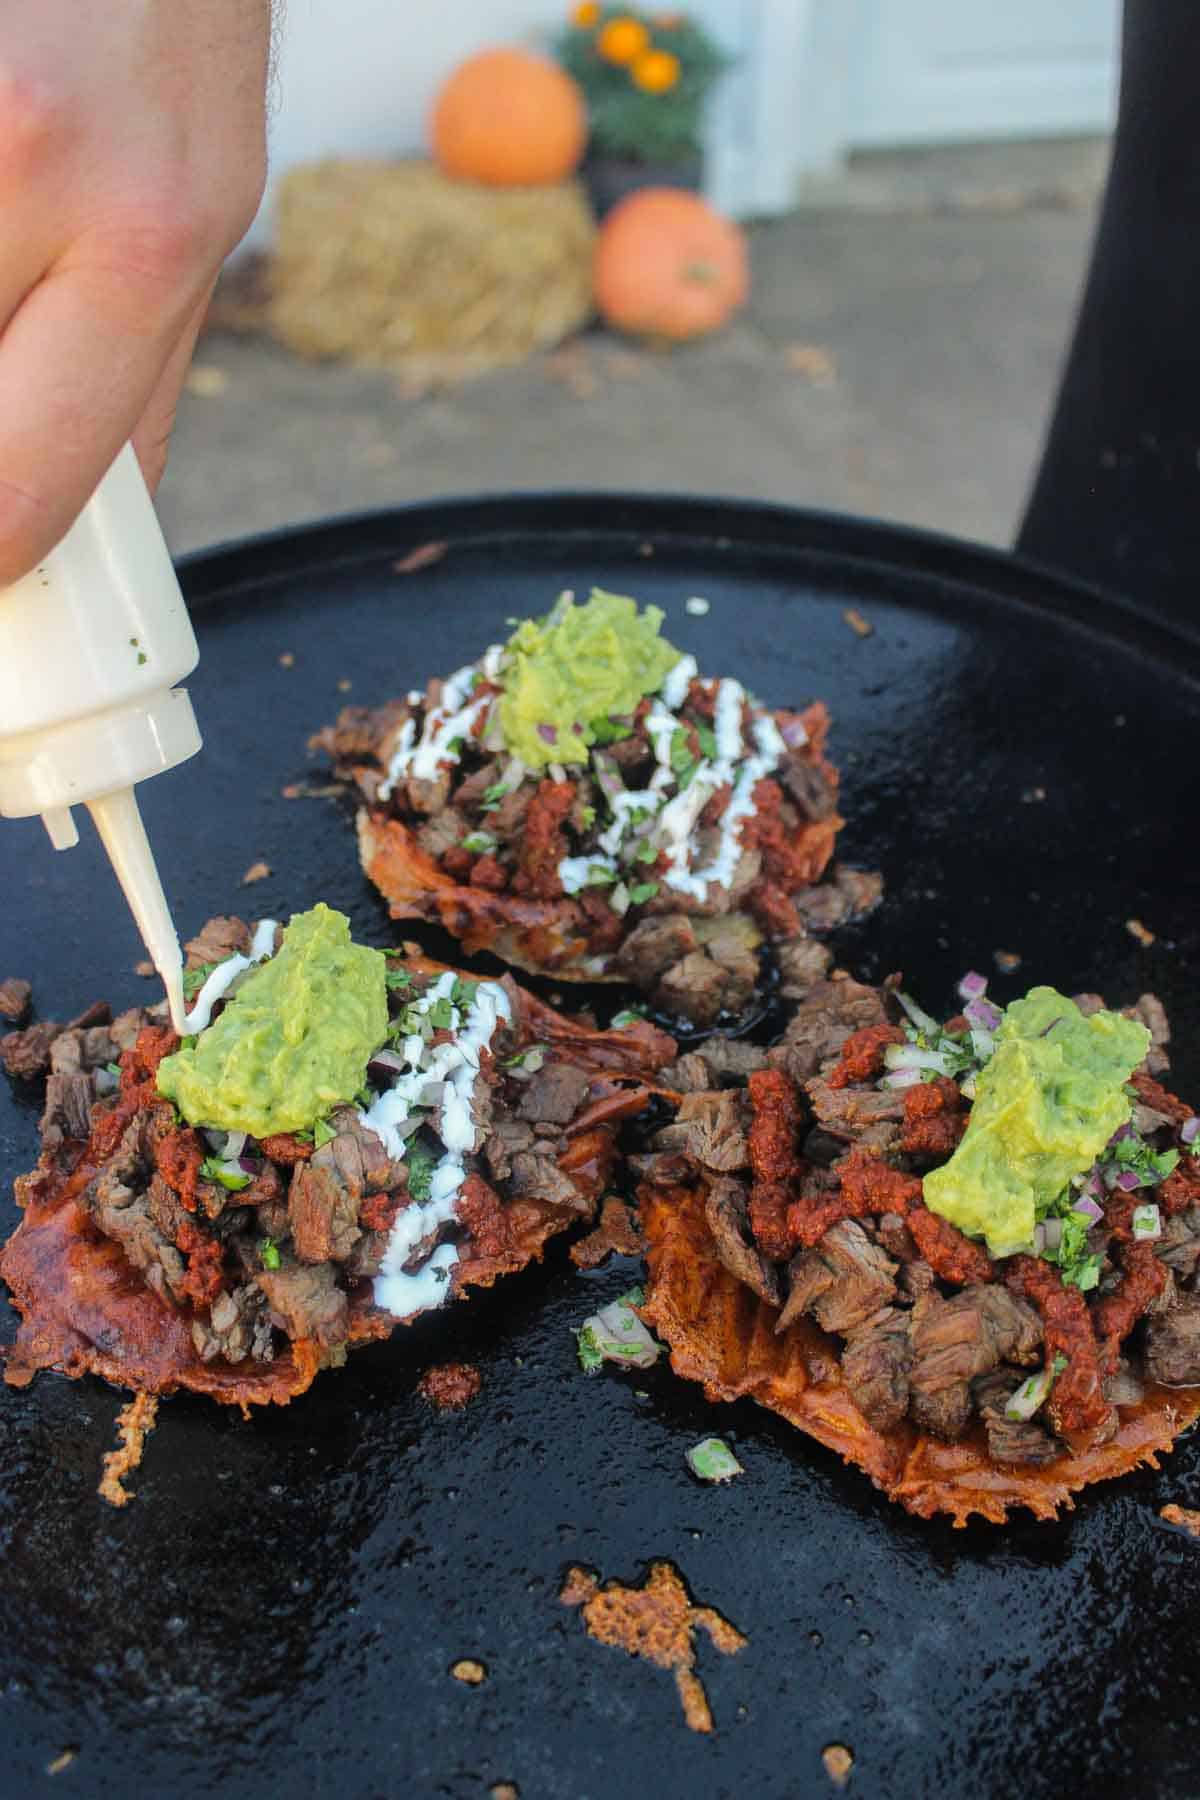 Topping the Grilled Steak Vampiro Tacos with Sour Cream.